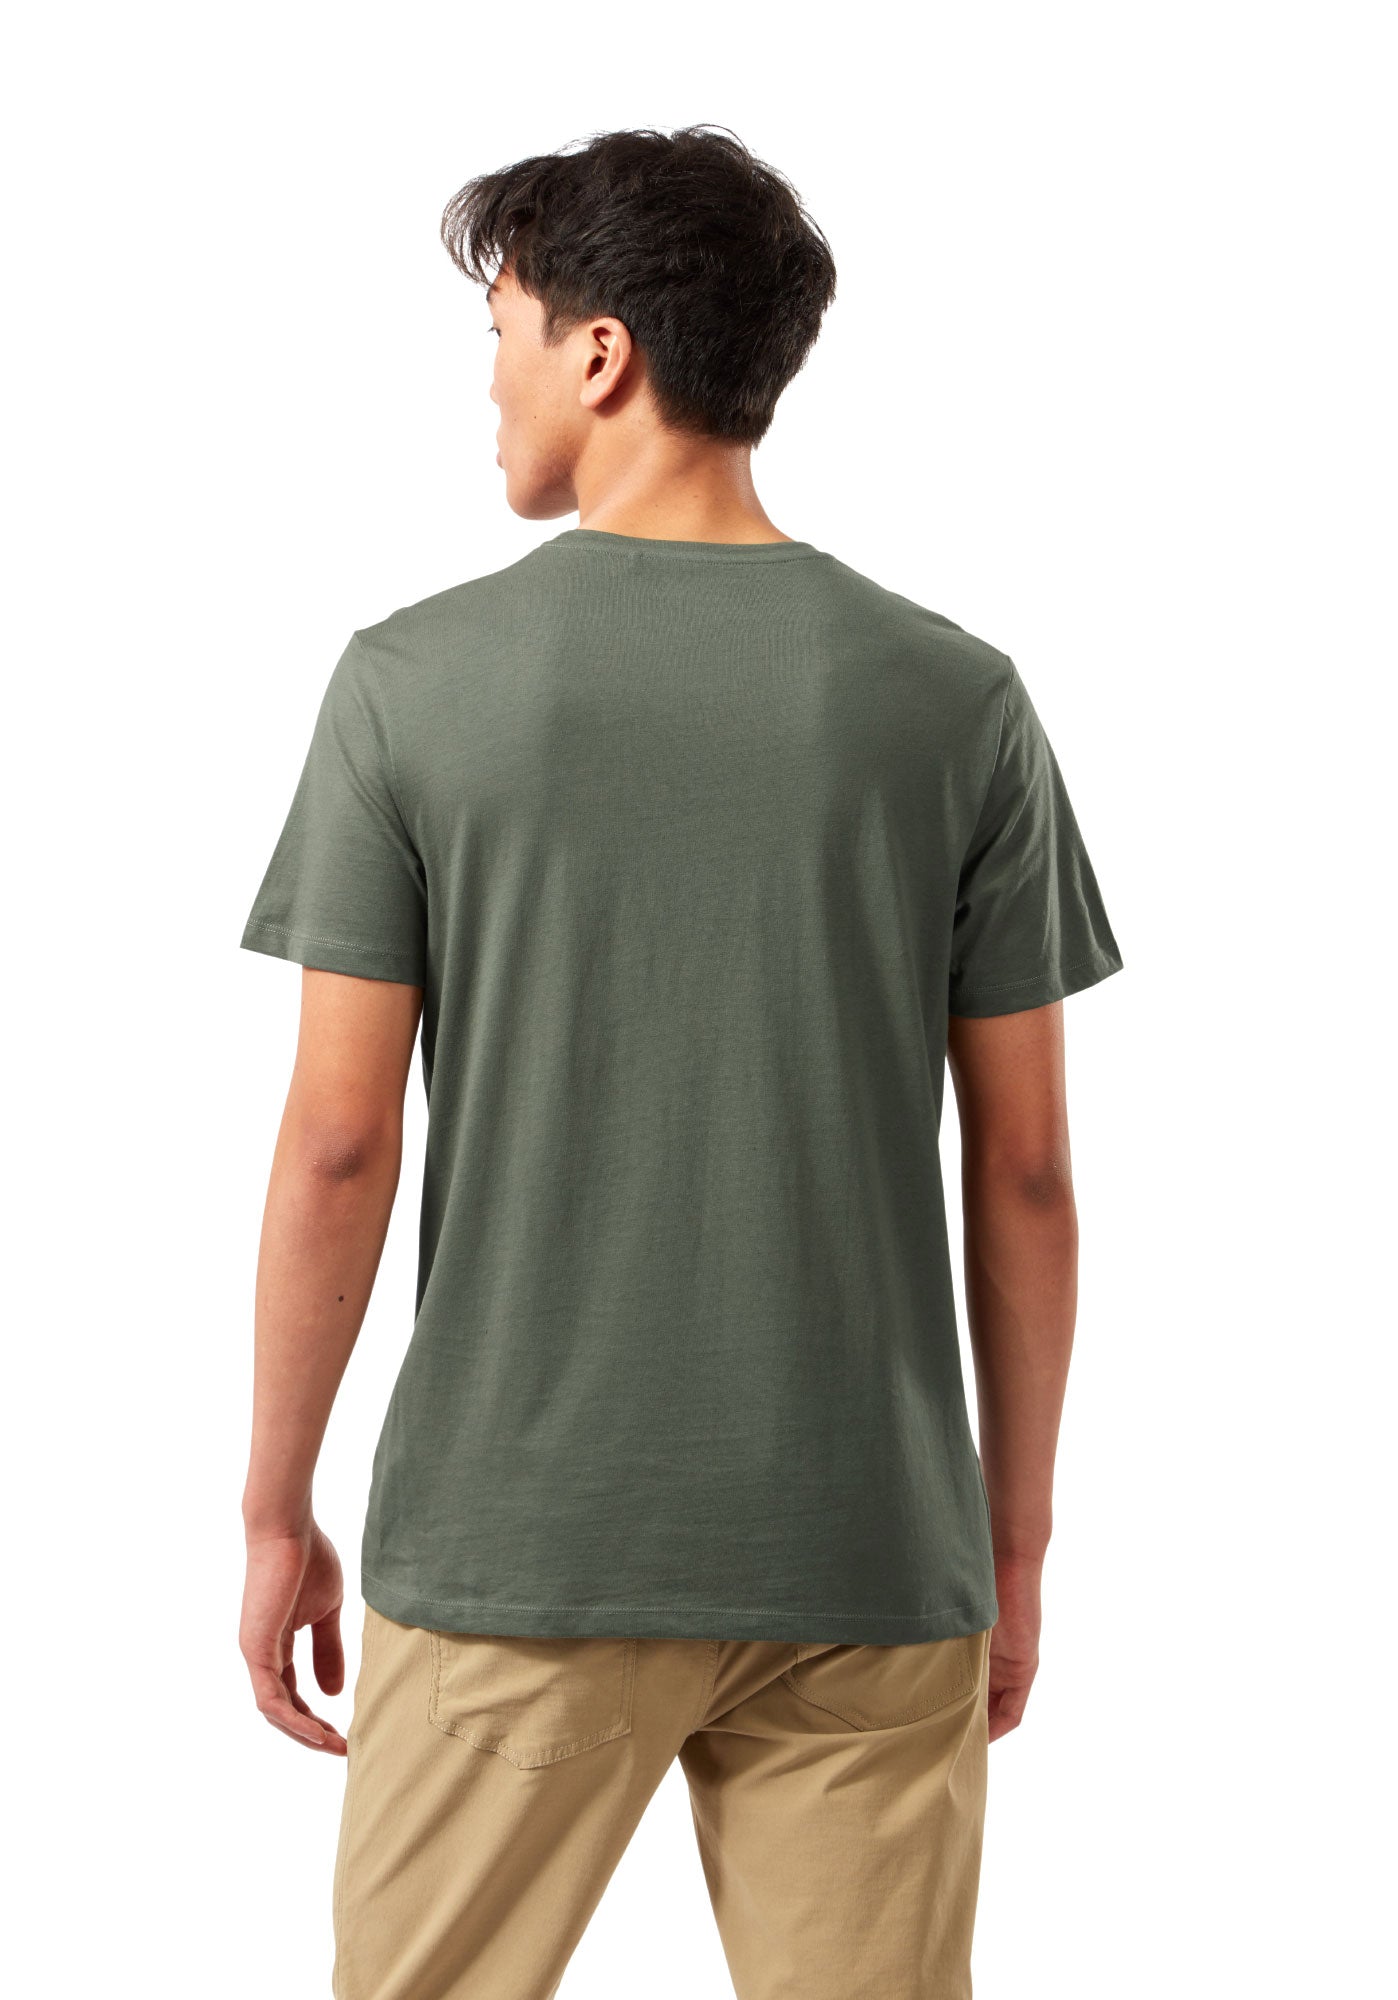 Parka Green Mightie Short Sleeve Cotton T-Shirt by Craghoppers 